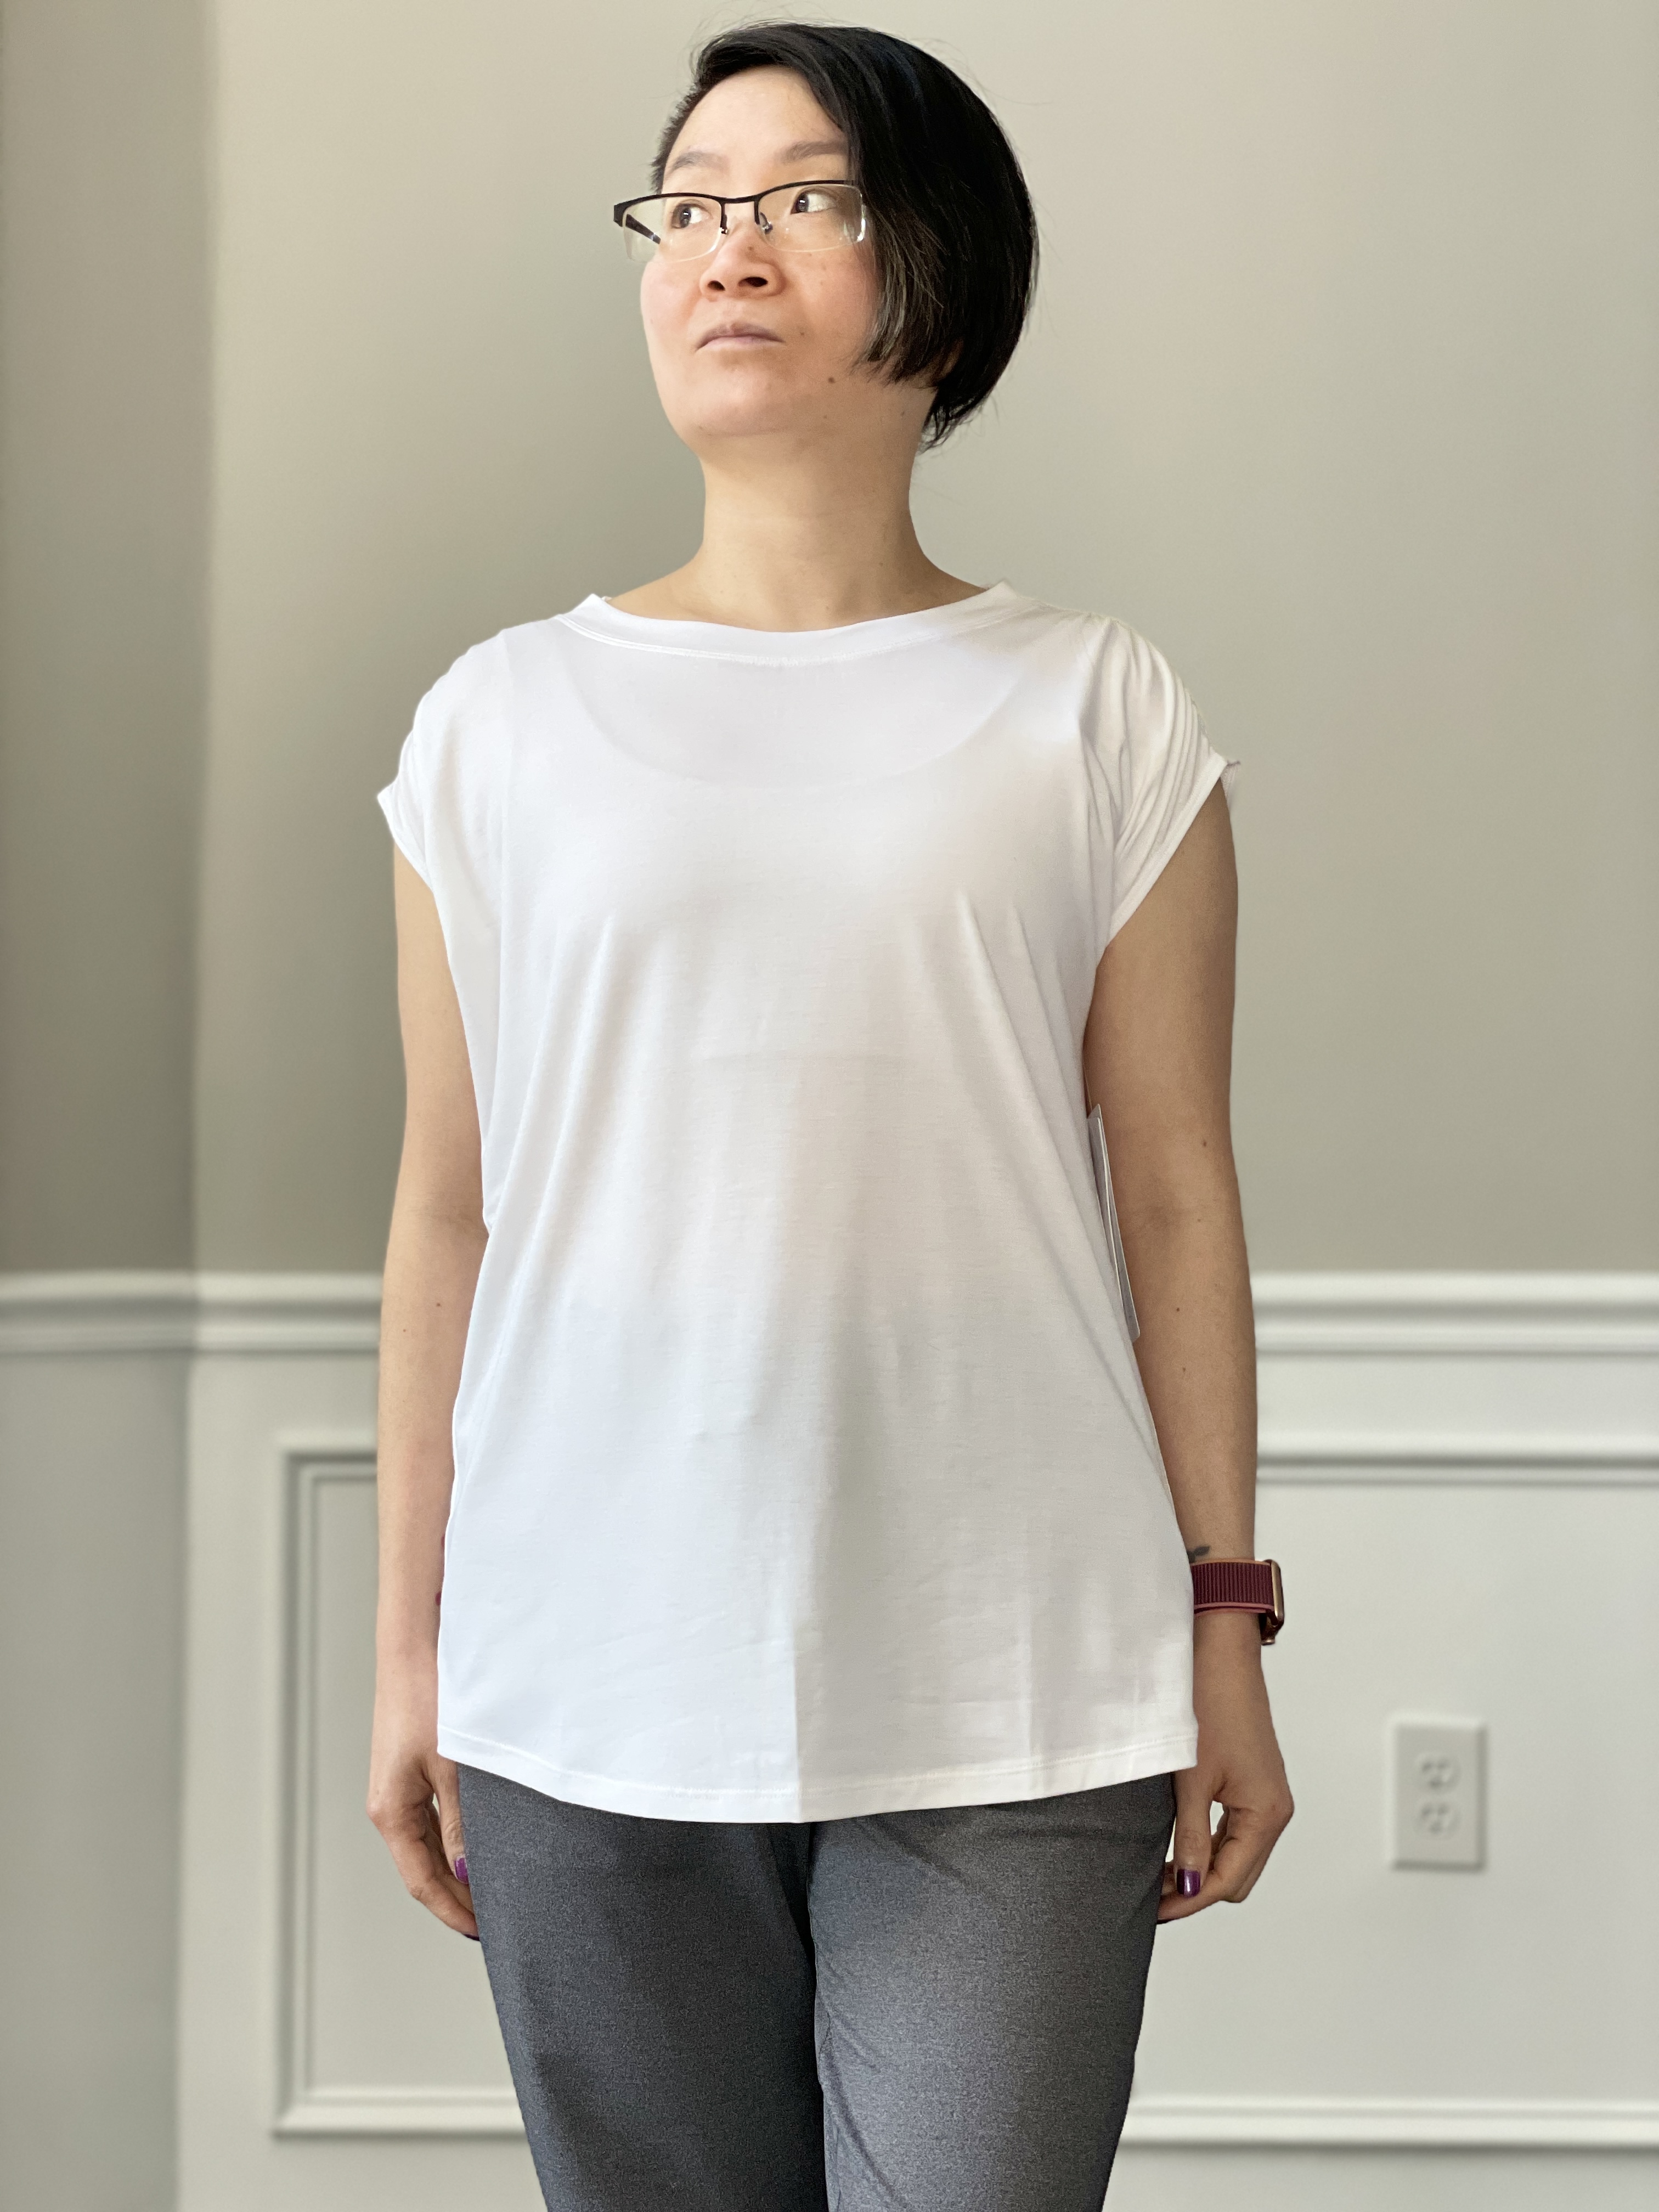 Fit Review Friday! Athleta Haul- Outbound Tee, Urbanite Tank